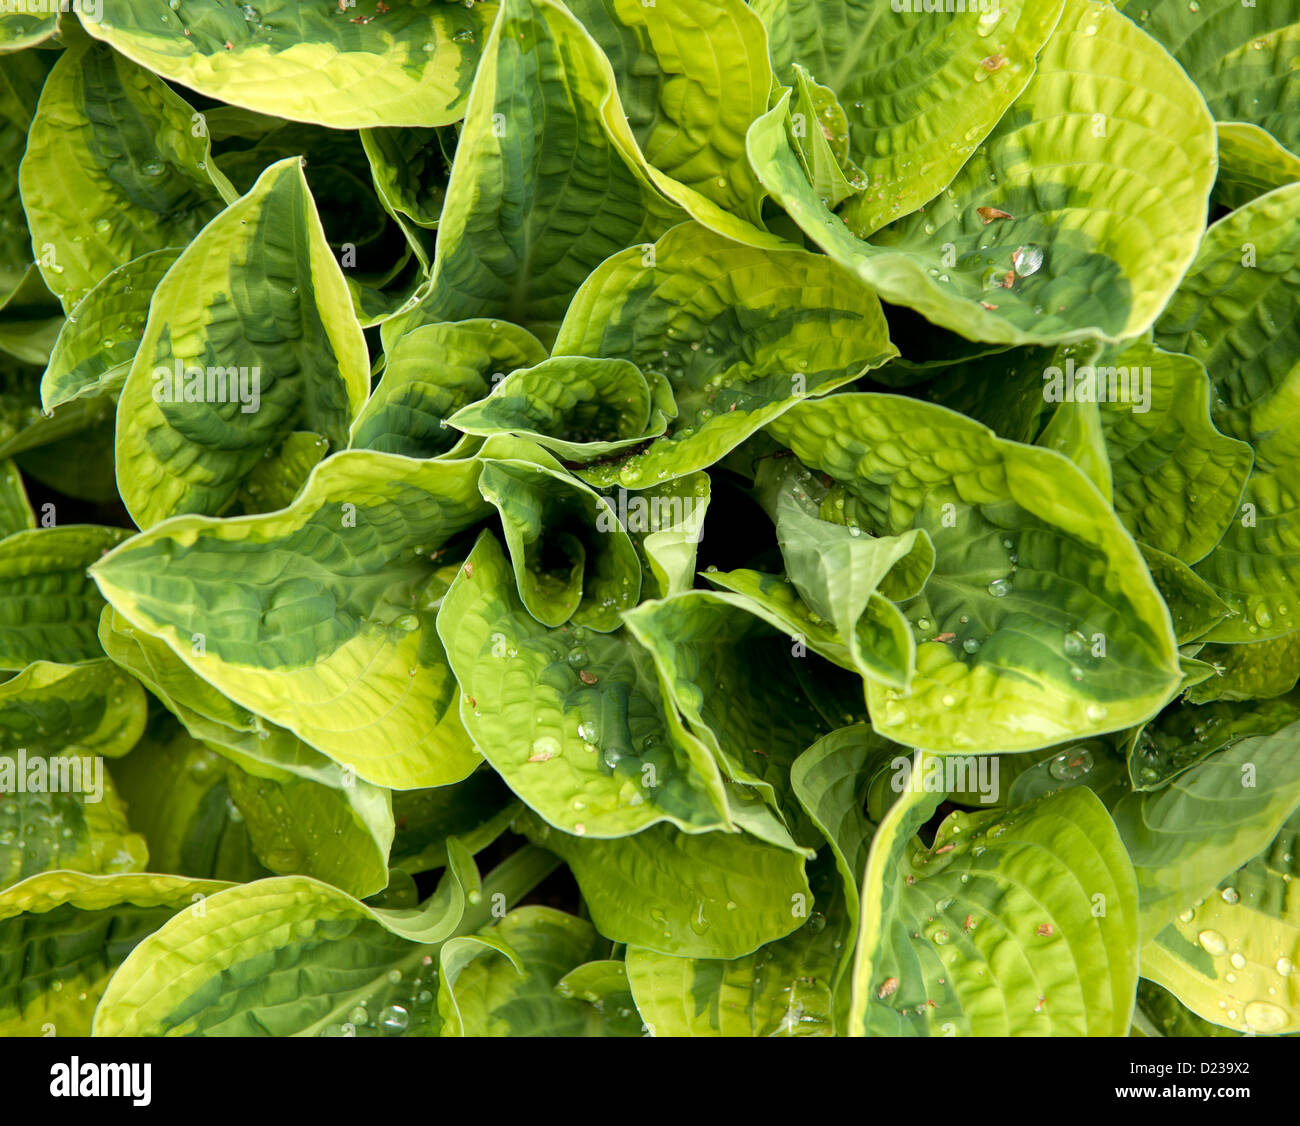 A hosta plant with variegated leaves Stock Photo